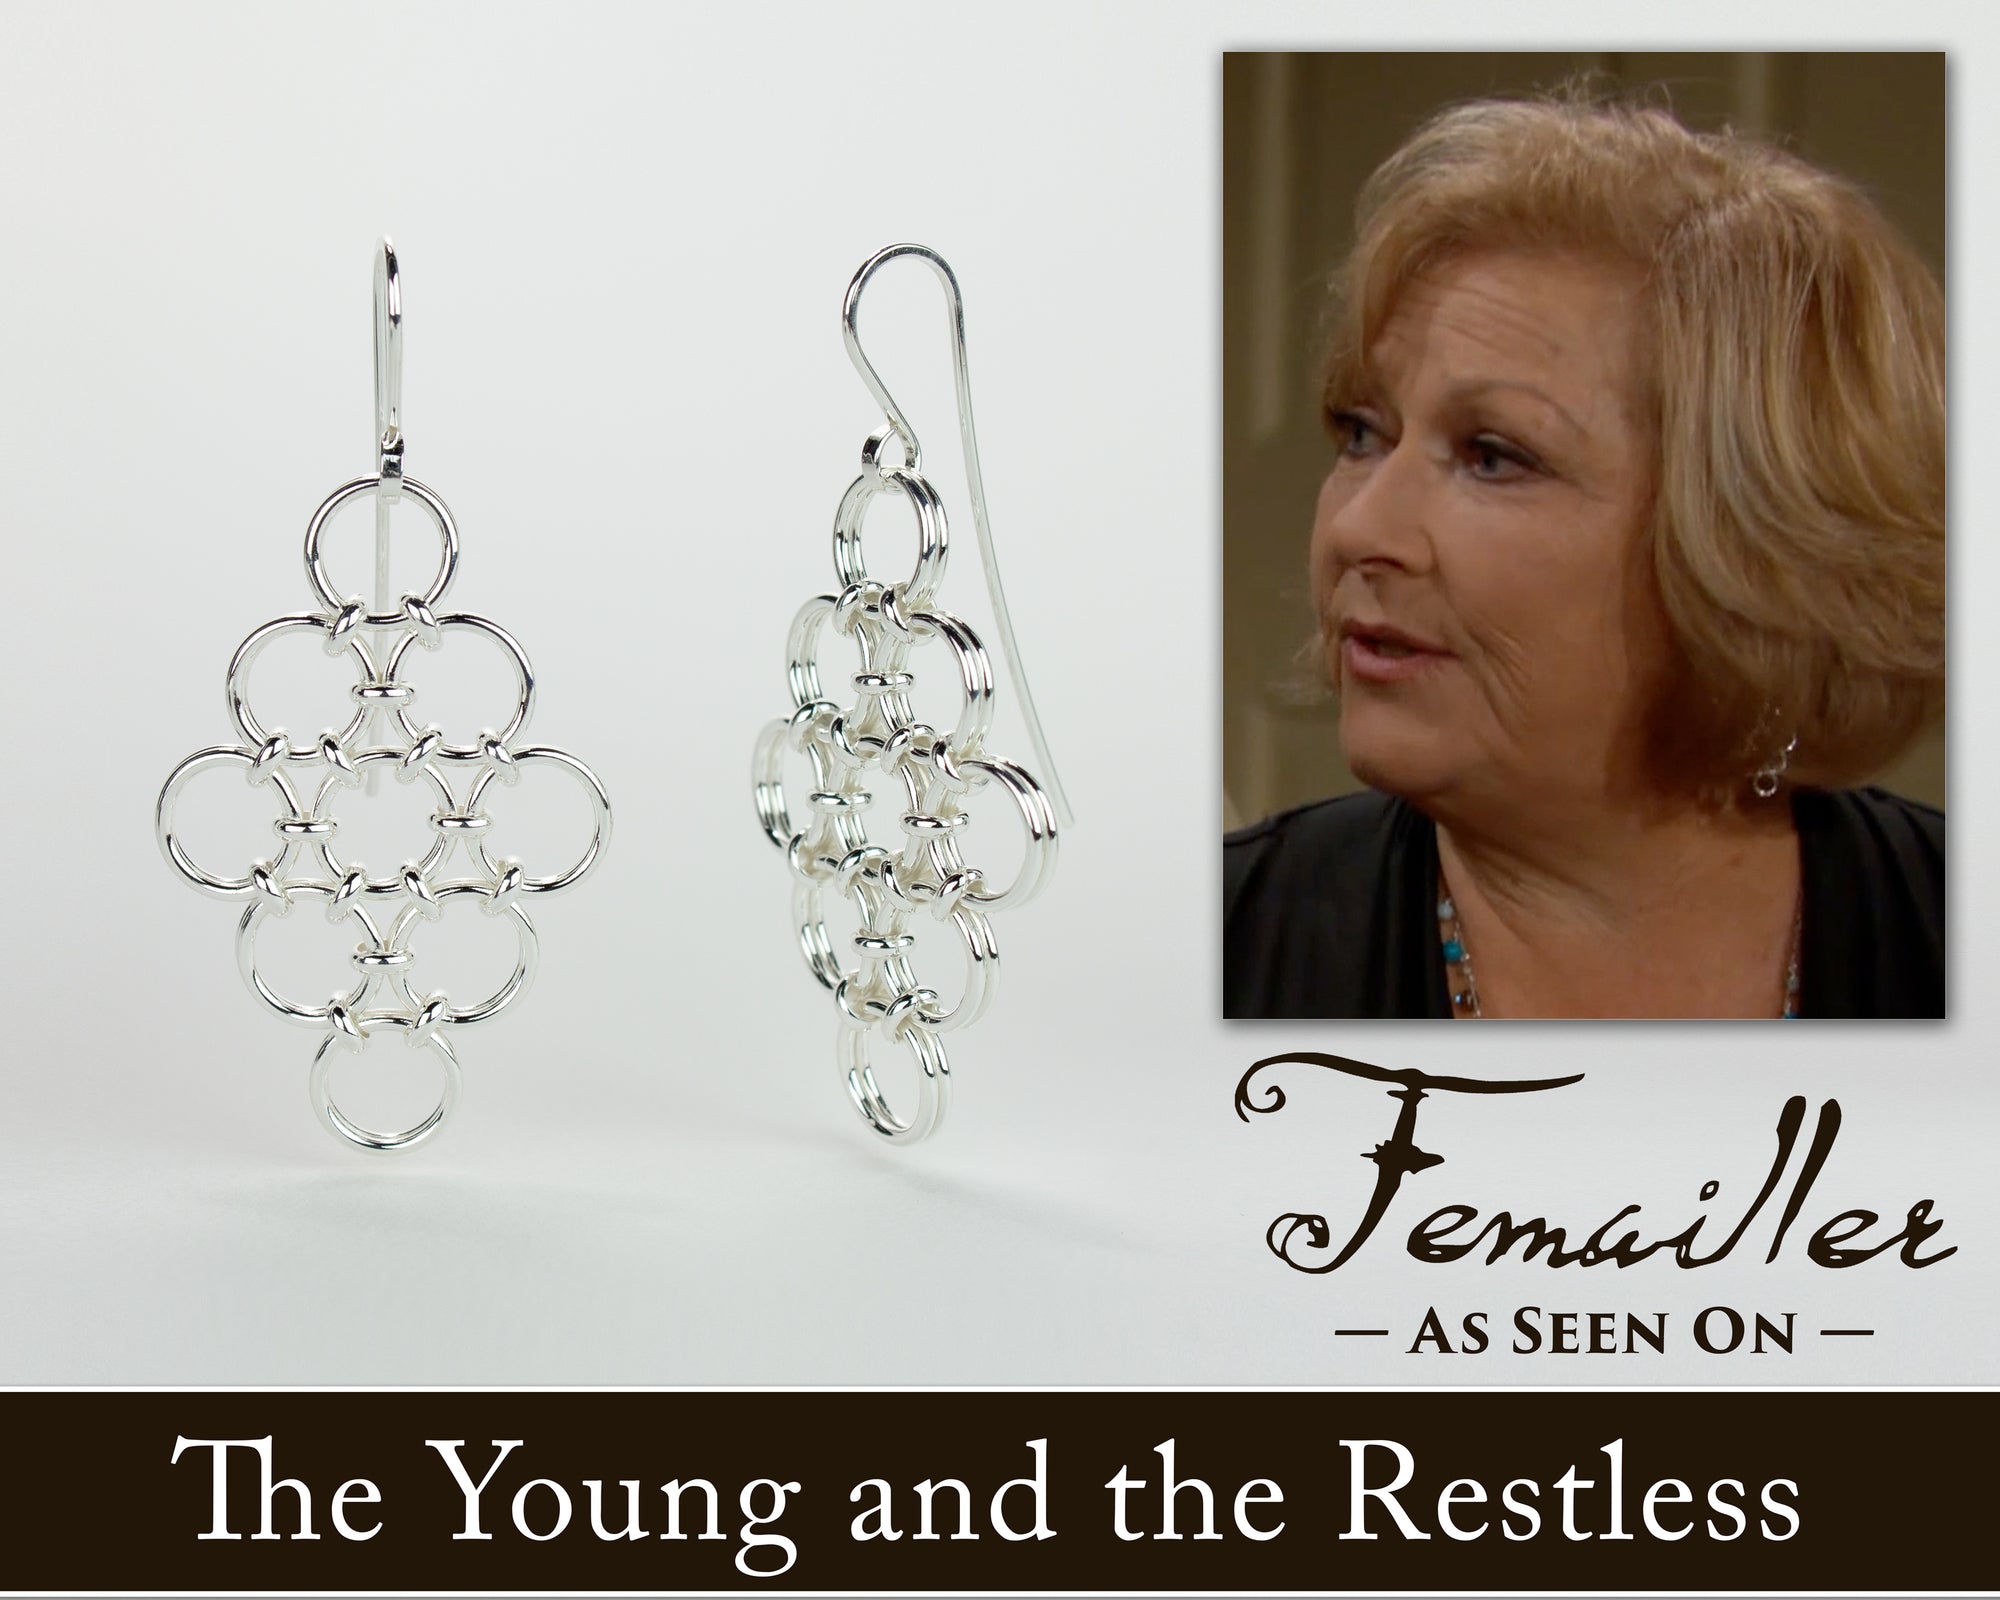 Femailler on The Young and the Restless (4th time!)